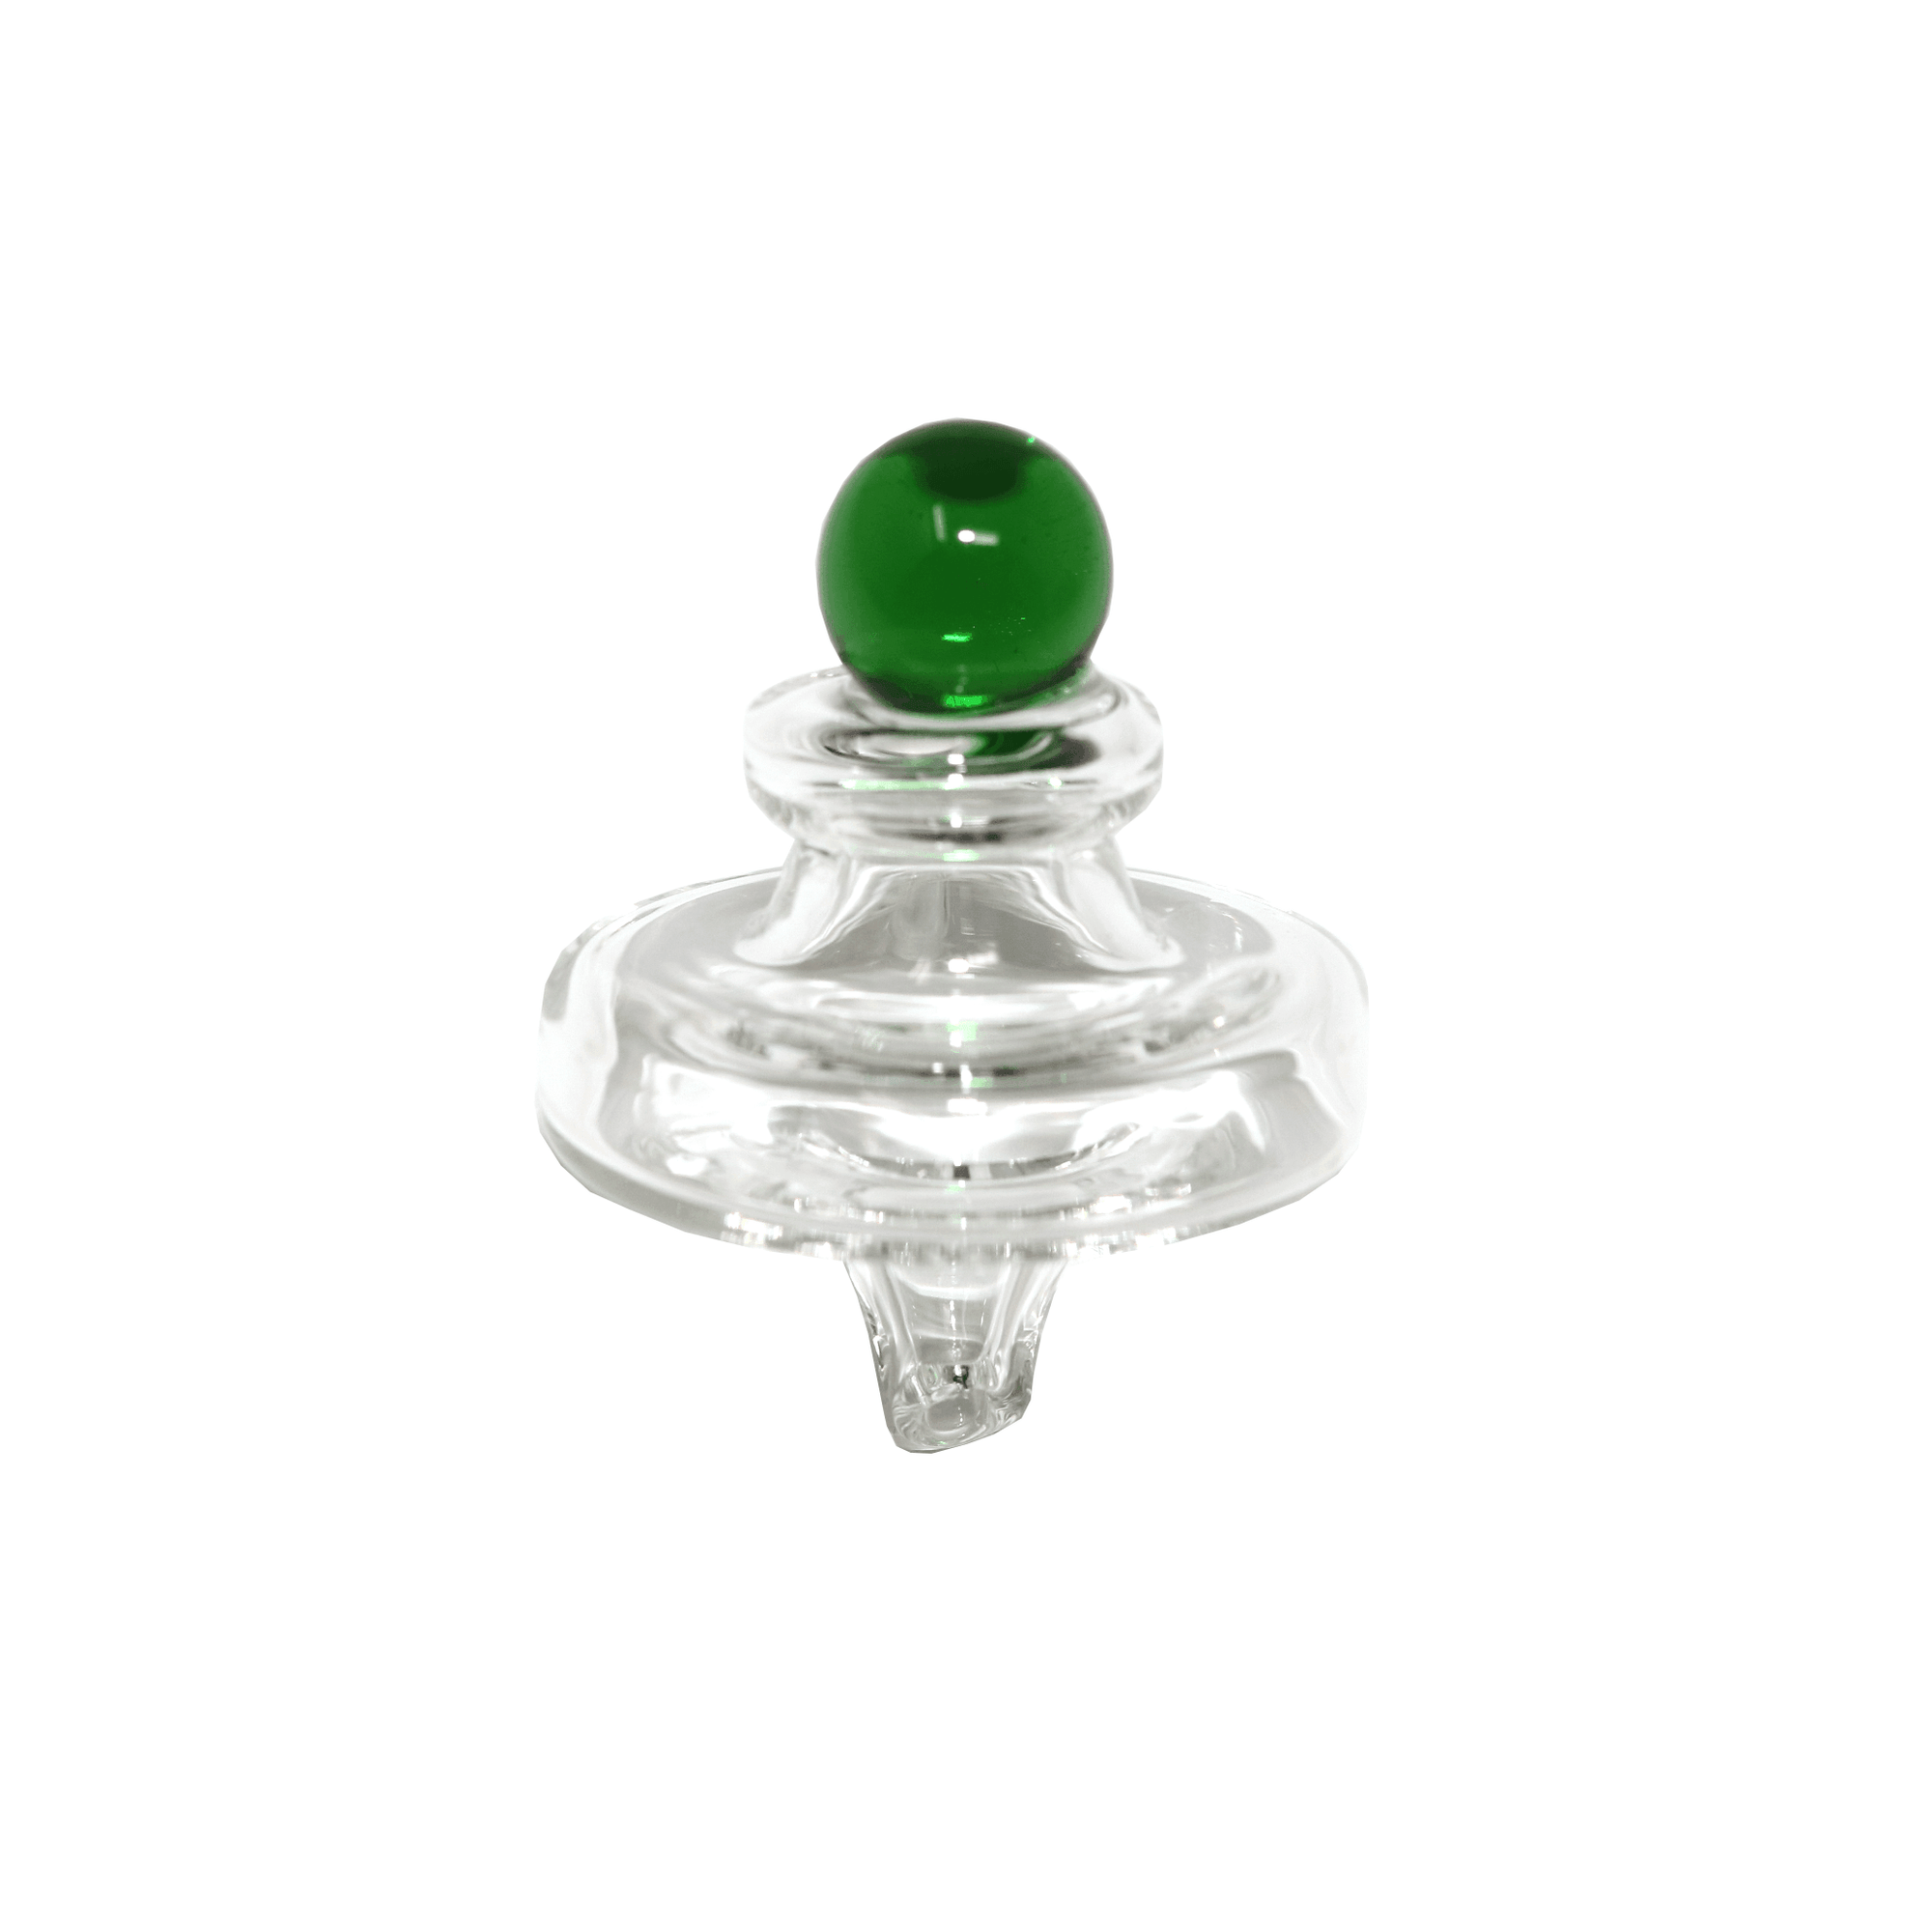 Quartz Banger Thermal Core Reactor 10mm Male With Saucer Cap | Cap | the dabbing specialists